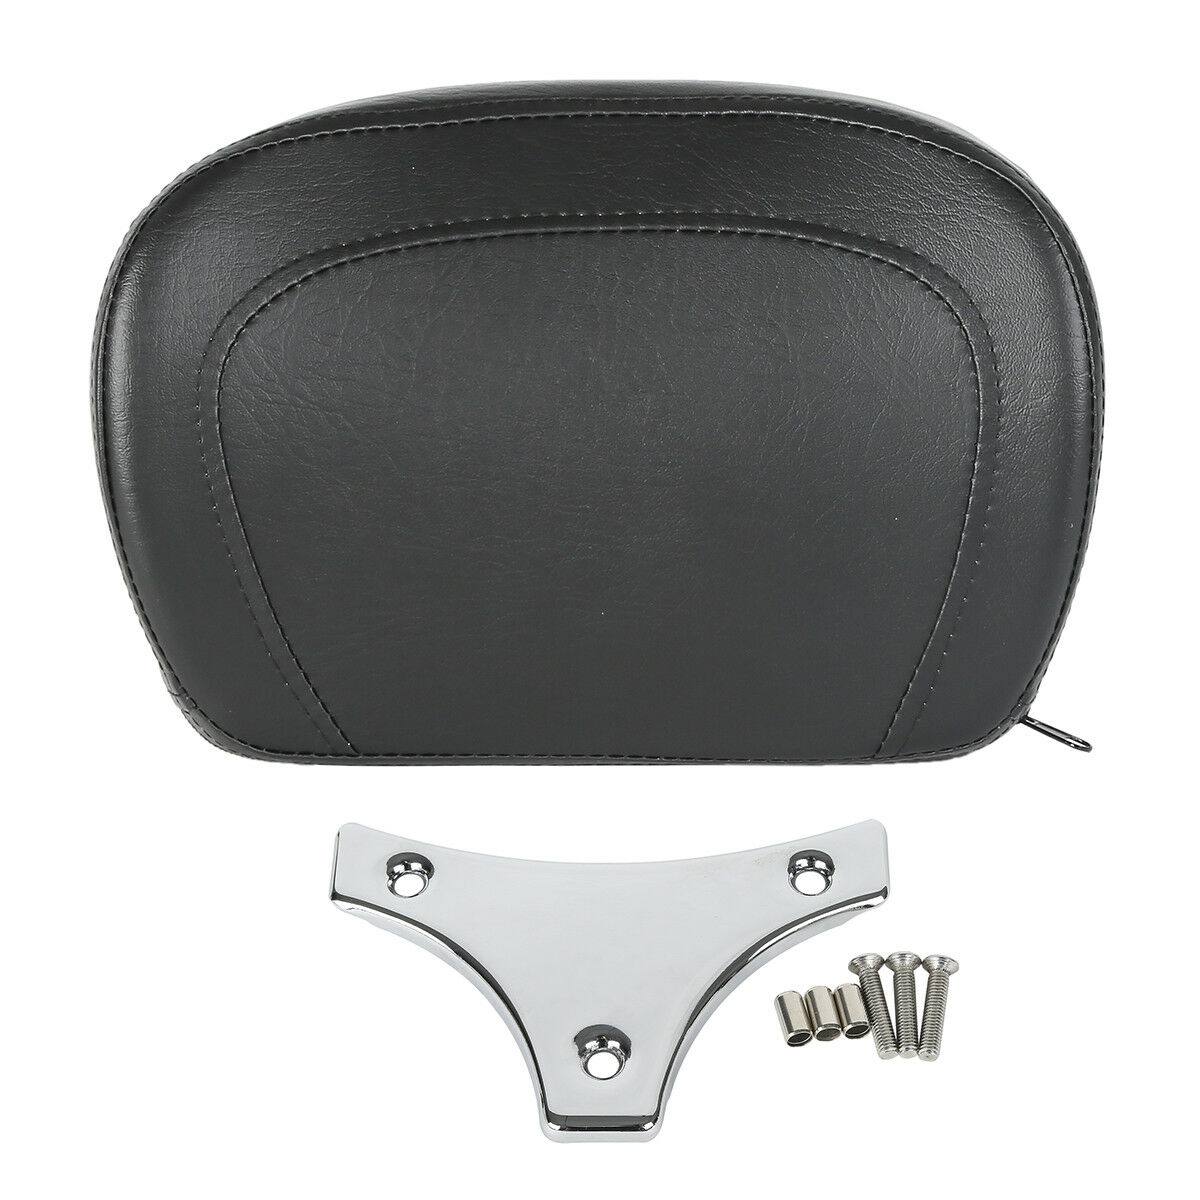 Sissy Bar Backrest Pad W/ Bracket Fit For Harley Touring Road King 1997-2018 17 - Moto Life Products